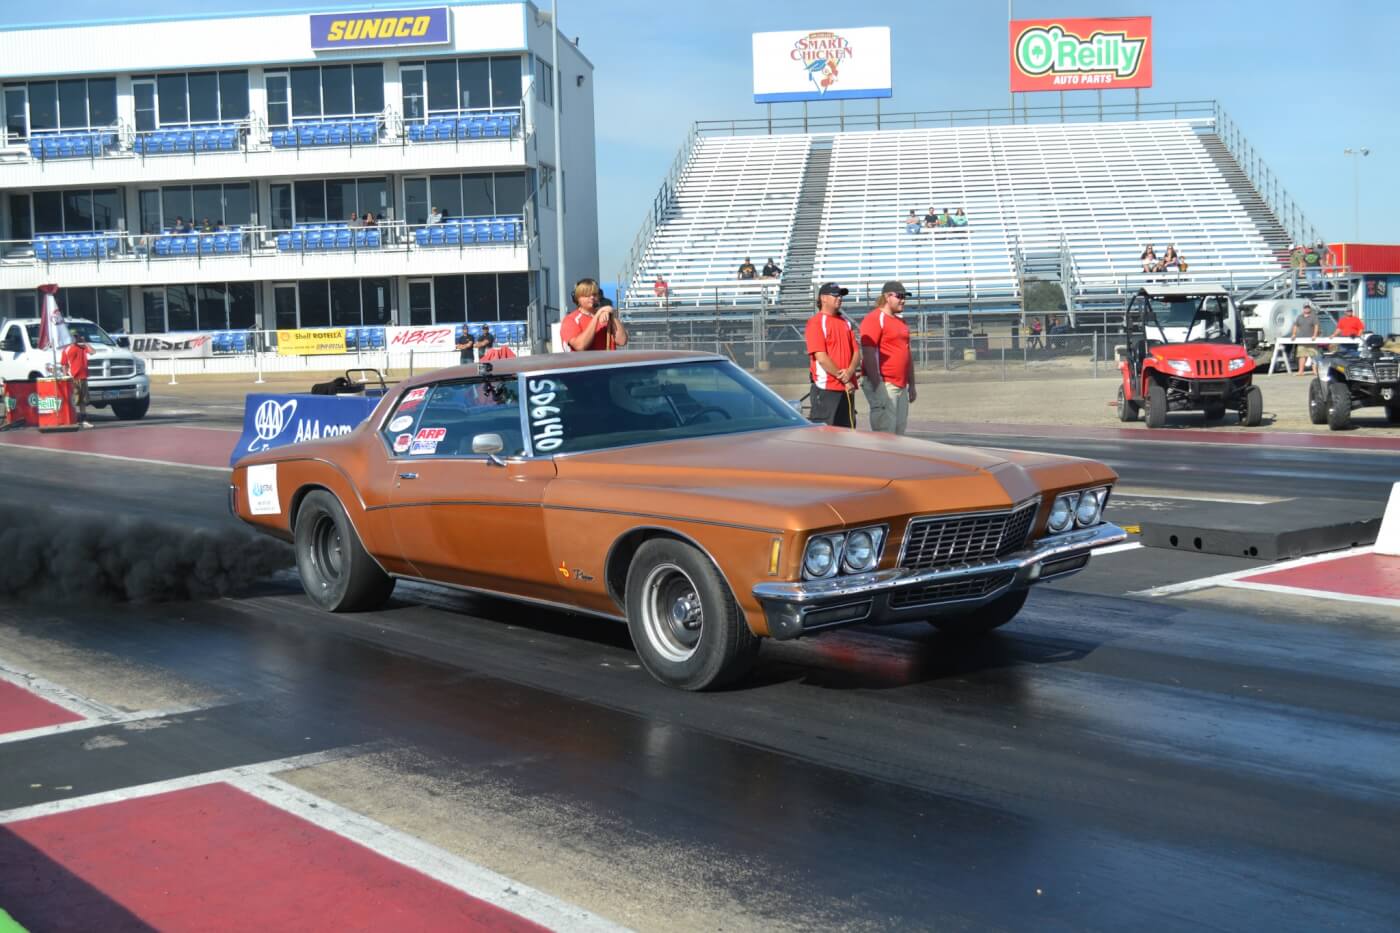 Another unique vehicle on the strip was Brandon Carr's 5.9L VP44 Cummins-powered Buick Riviera, which actually had to slow down from its usual low 11-second elapsed times in order to run 11.90.